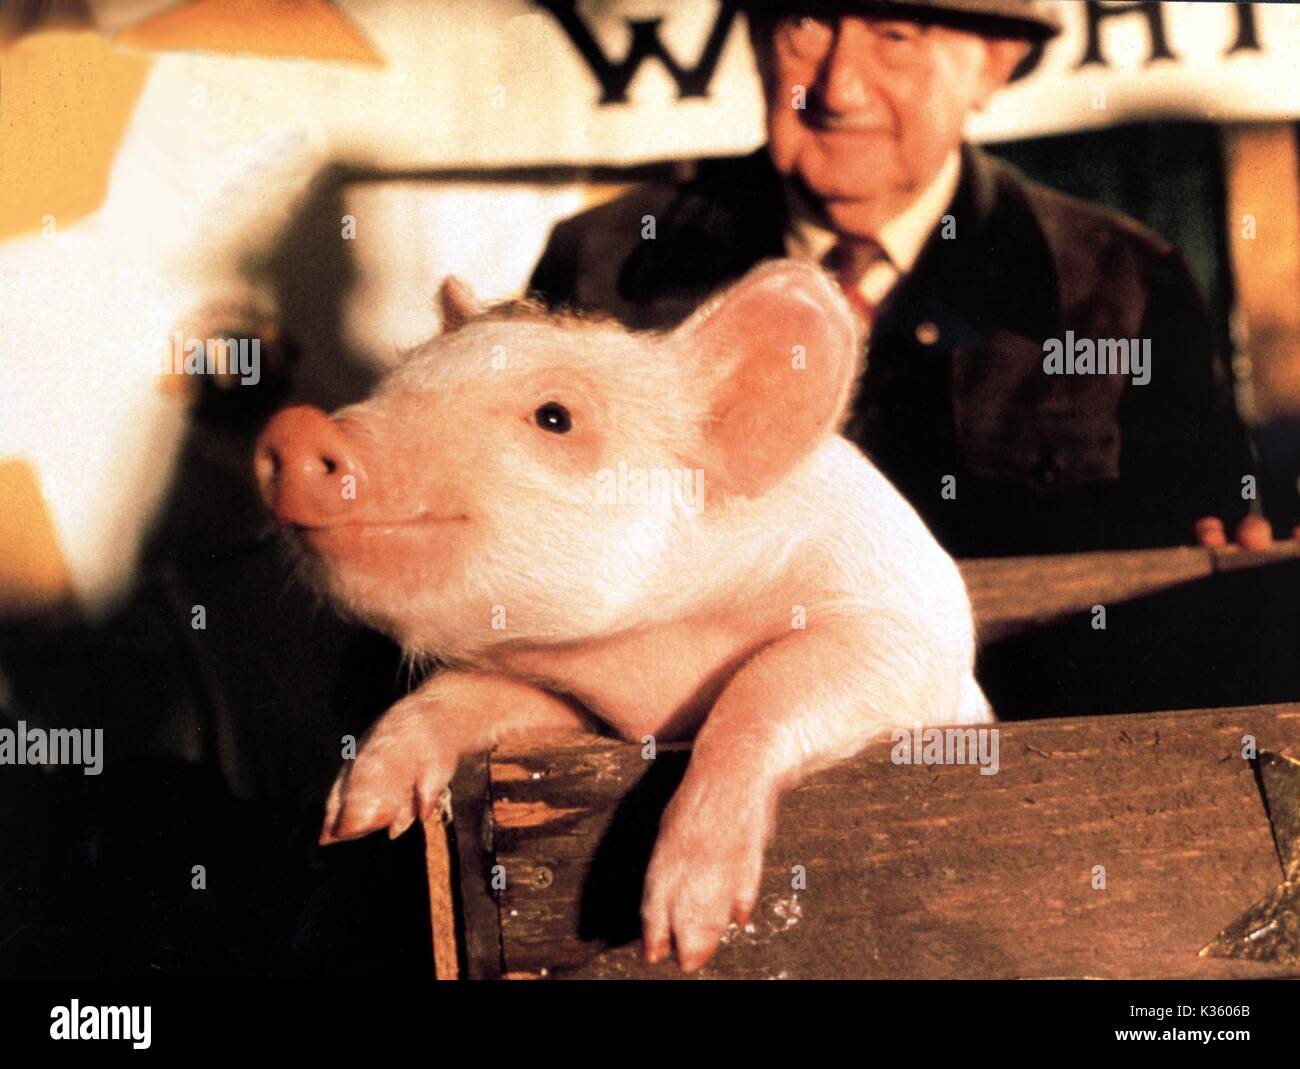 babe-the-gallant-pig-date-1995-stock-photo-alamy